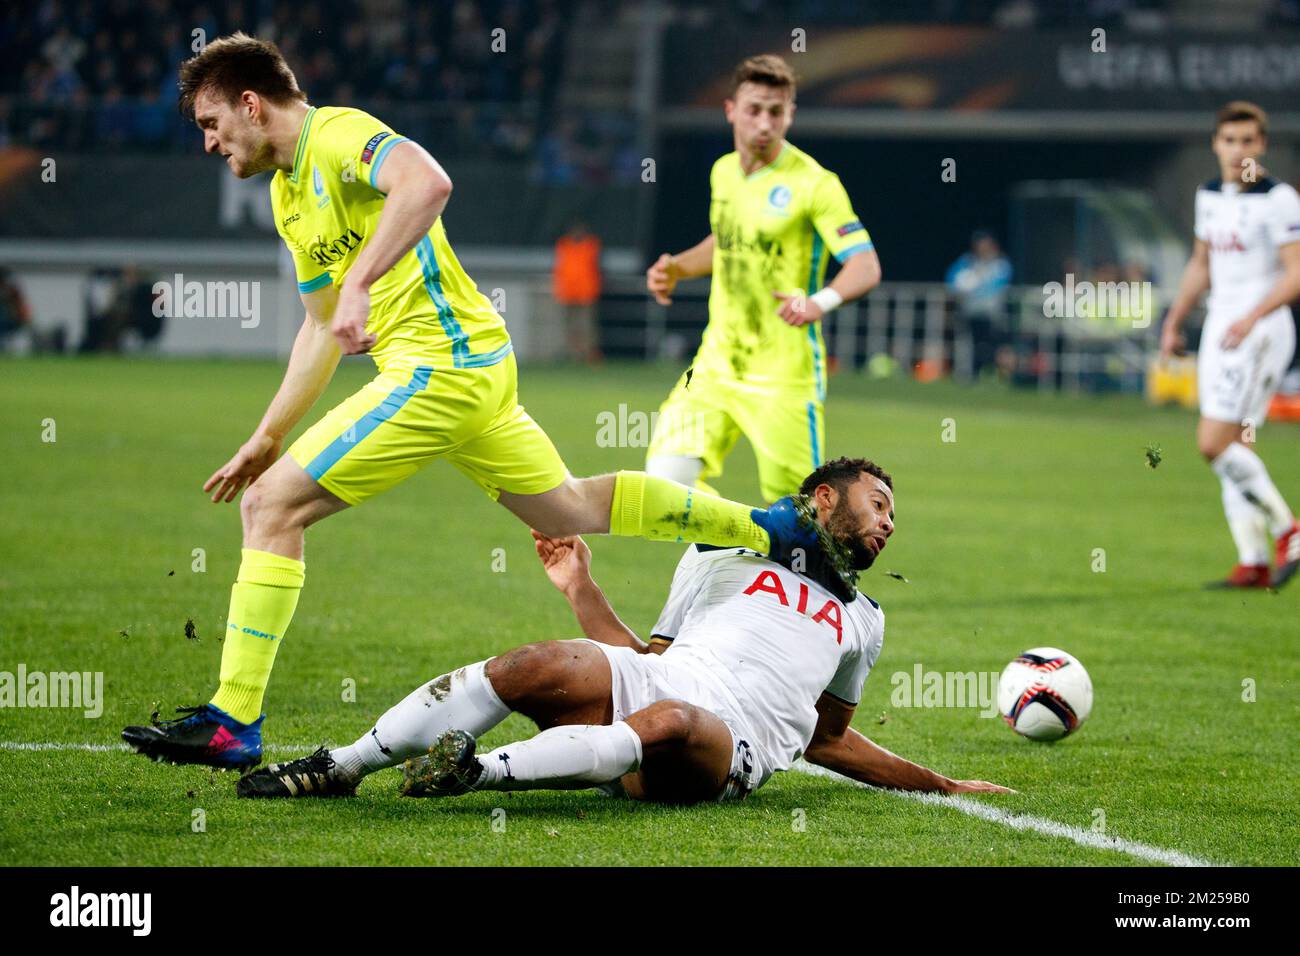 Gent's Thomas Foket and Tottenham's midfielder Mousa Dembele fight for the ball during a game between Belgian soccer team KAA Gent and British team Tottenham, first-leg of the 1/16 finals of the Europa League competition, Thursday 16 February 2017, in Gent. BELGA PHOTO KURT DESPLENTER Stock Photo